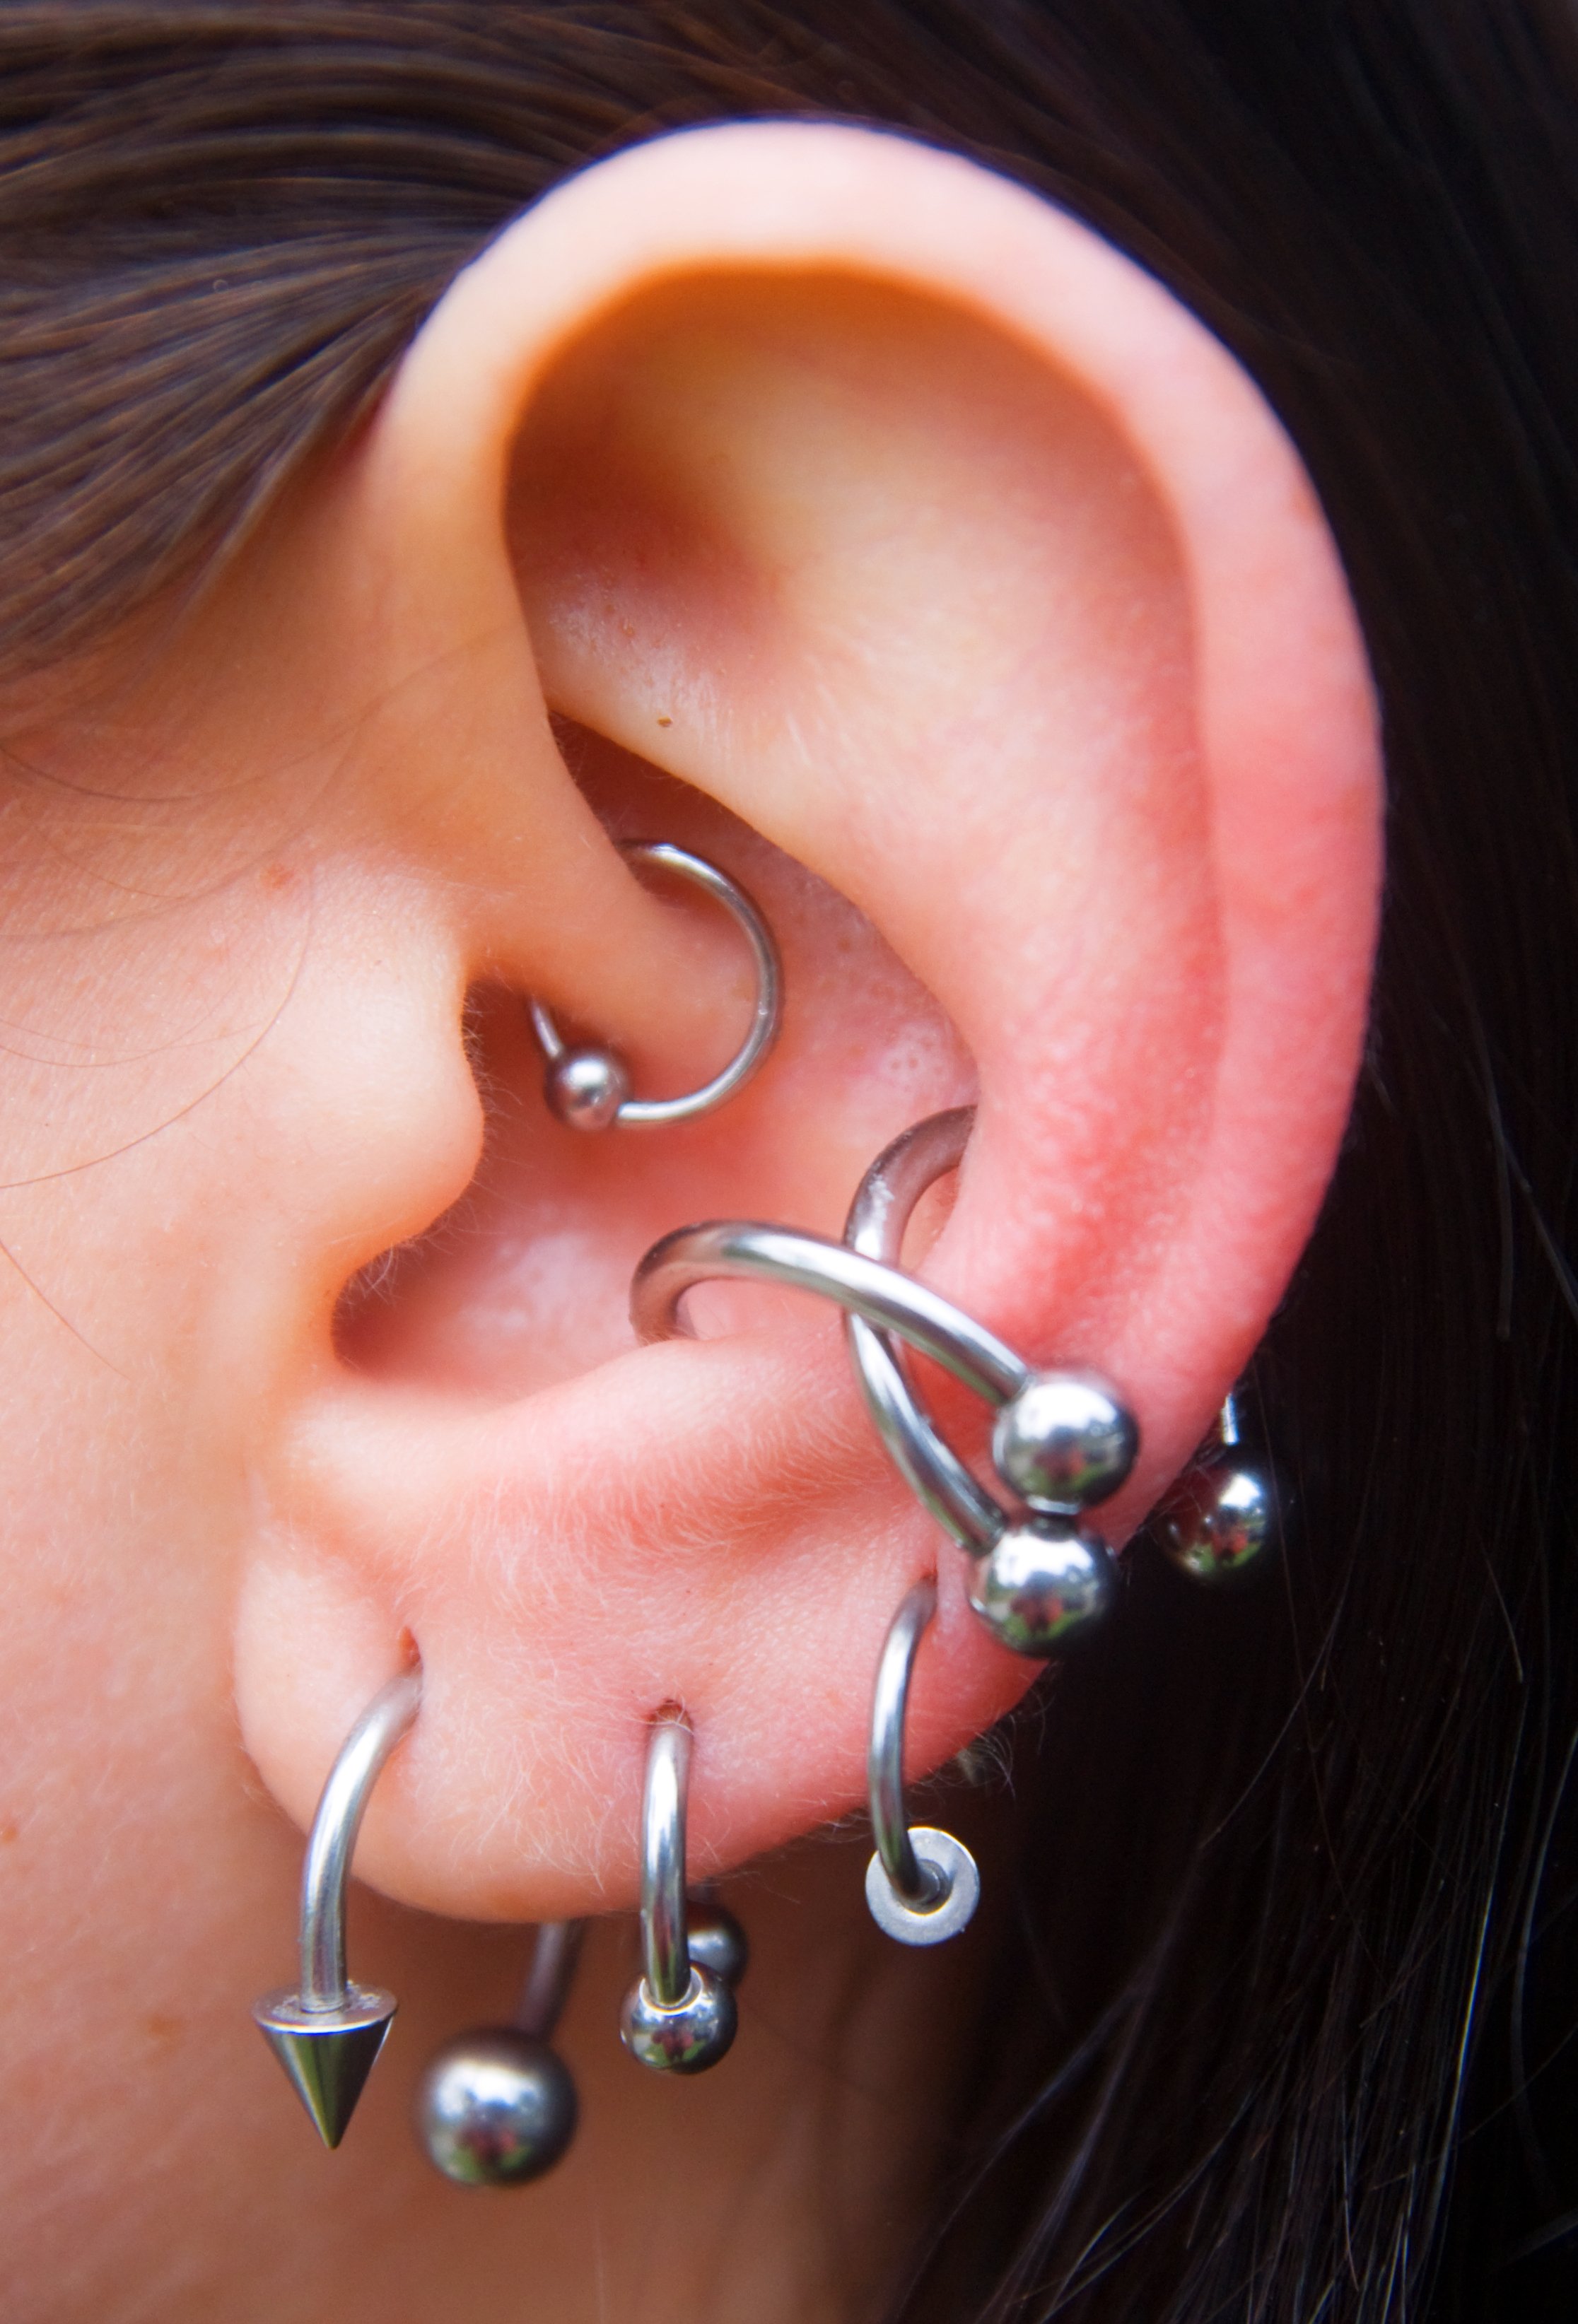 Rook piercing. | Source: Getty Images